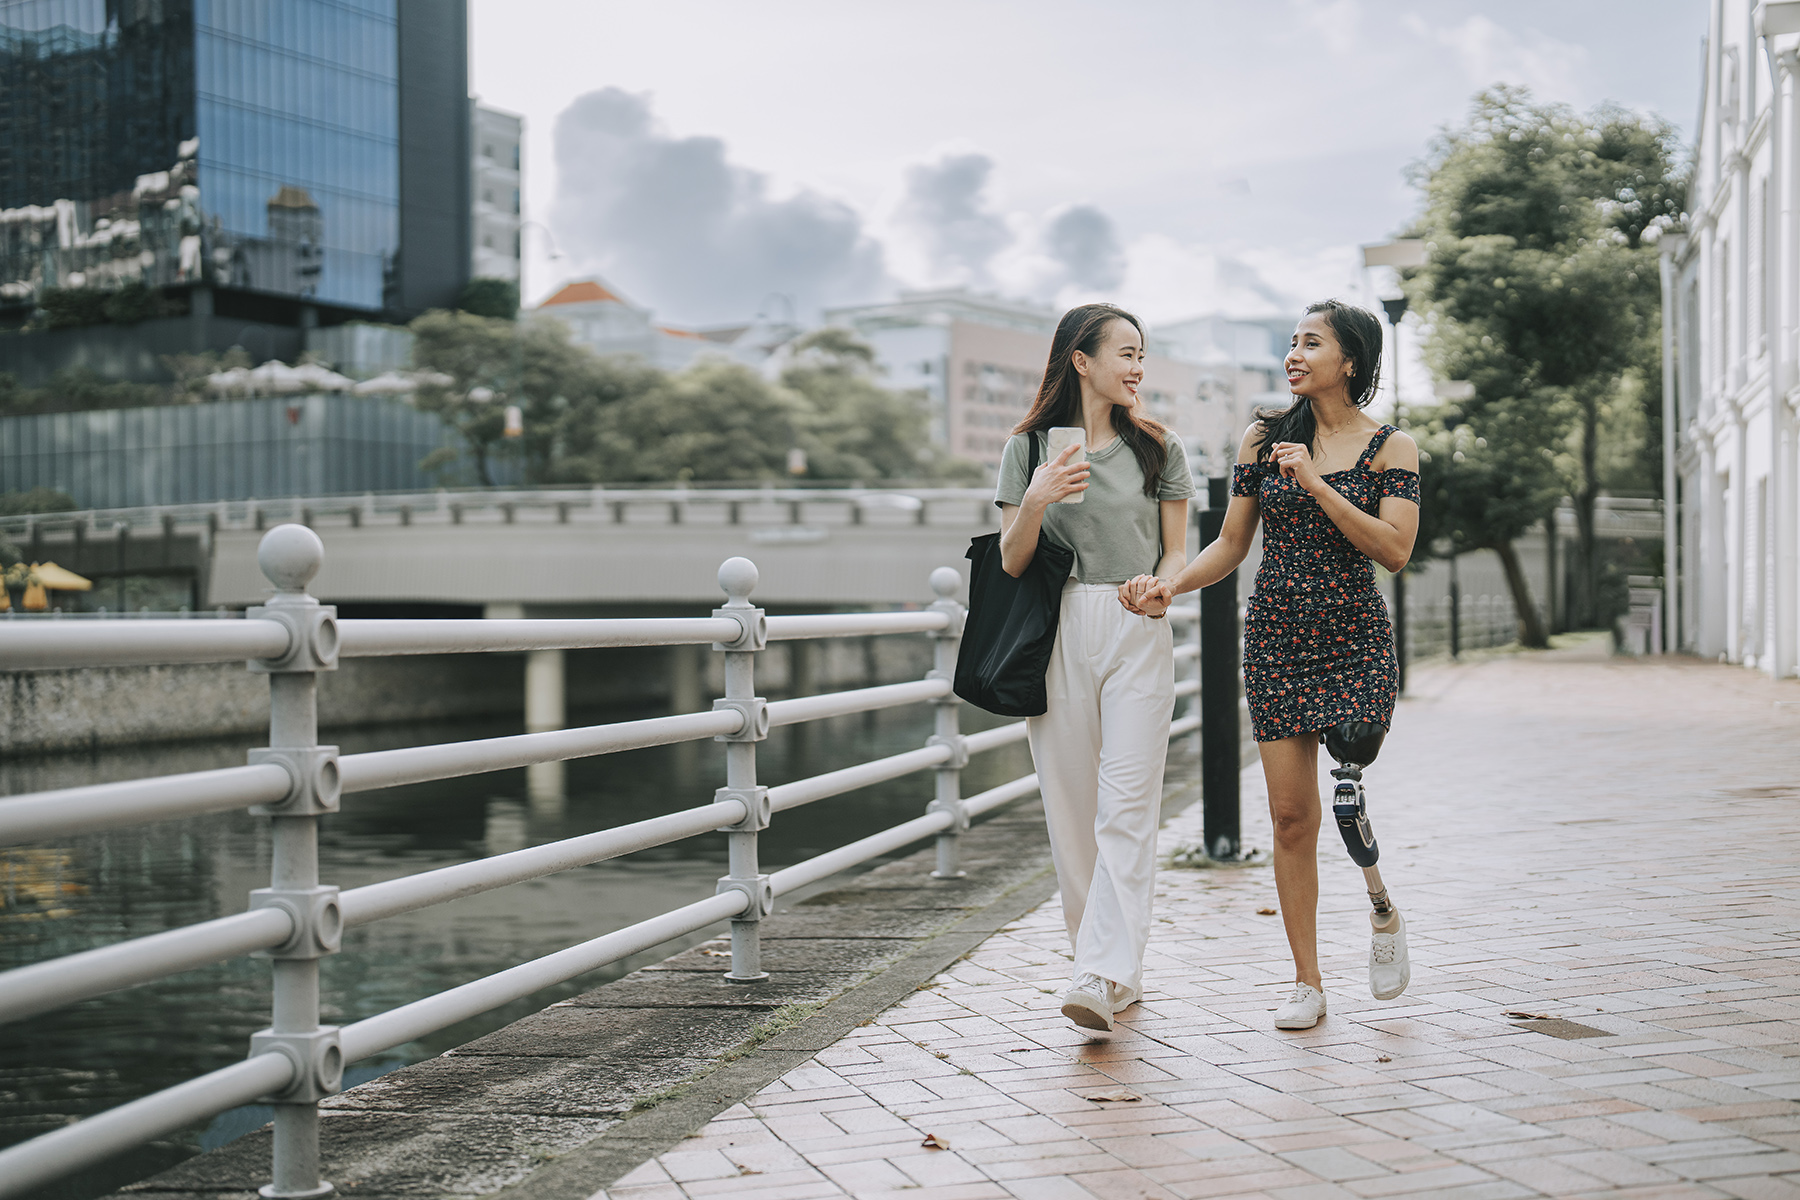 Two women holding hand s walks next to a river in Singapore. One has a prosthetic leg

